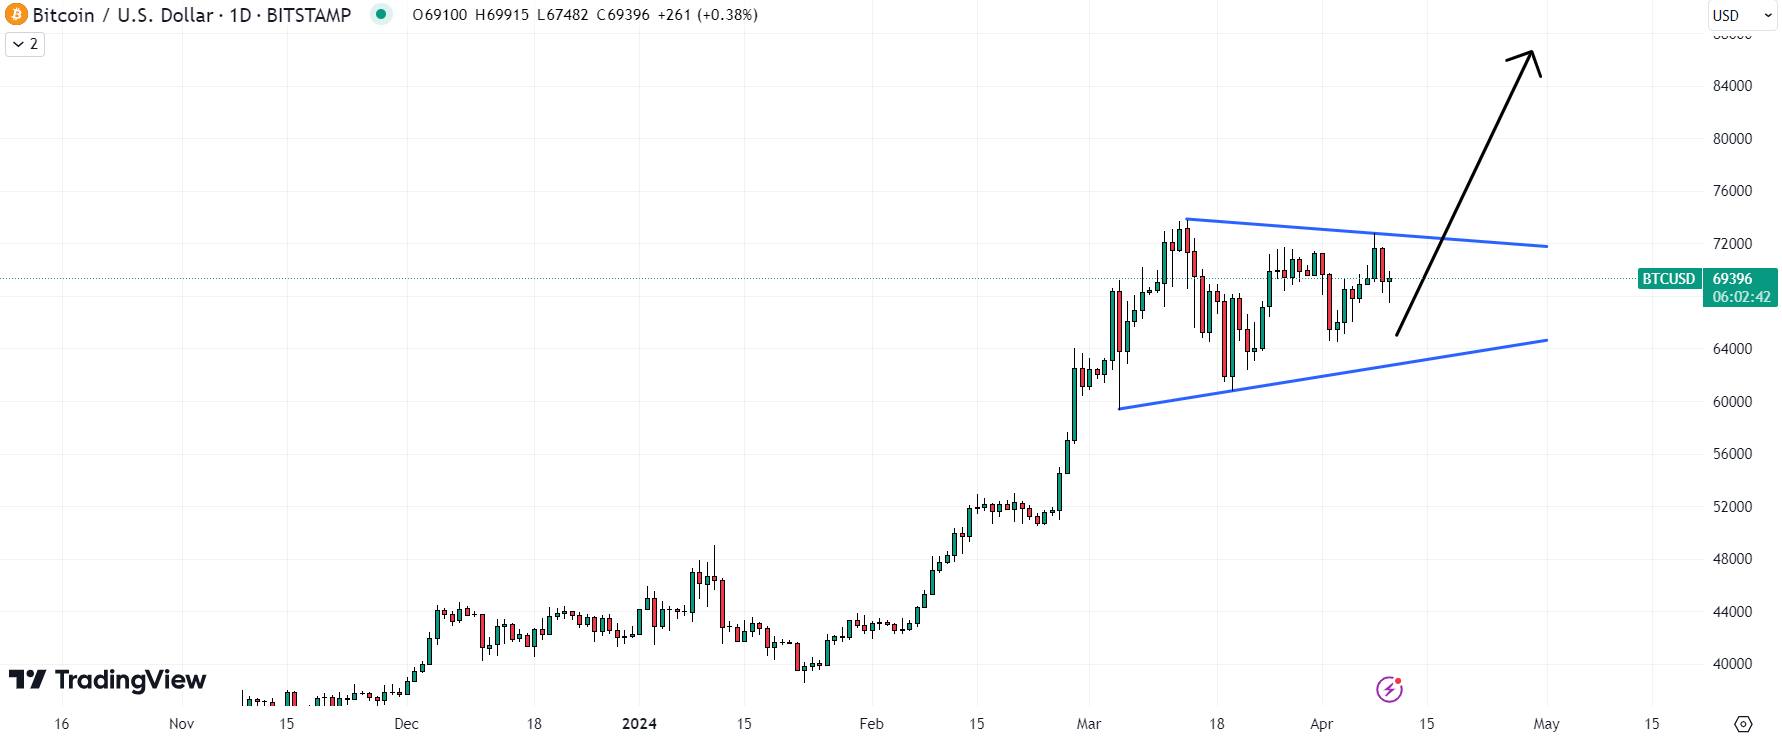 The Bitcoin price could shoot higher once it breaks through its current consolidation zone. 